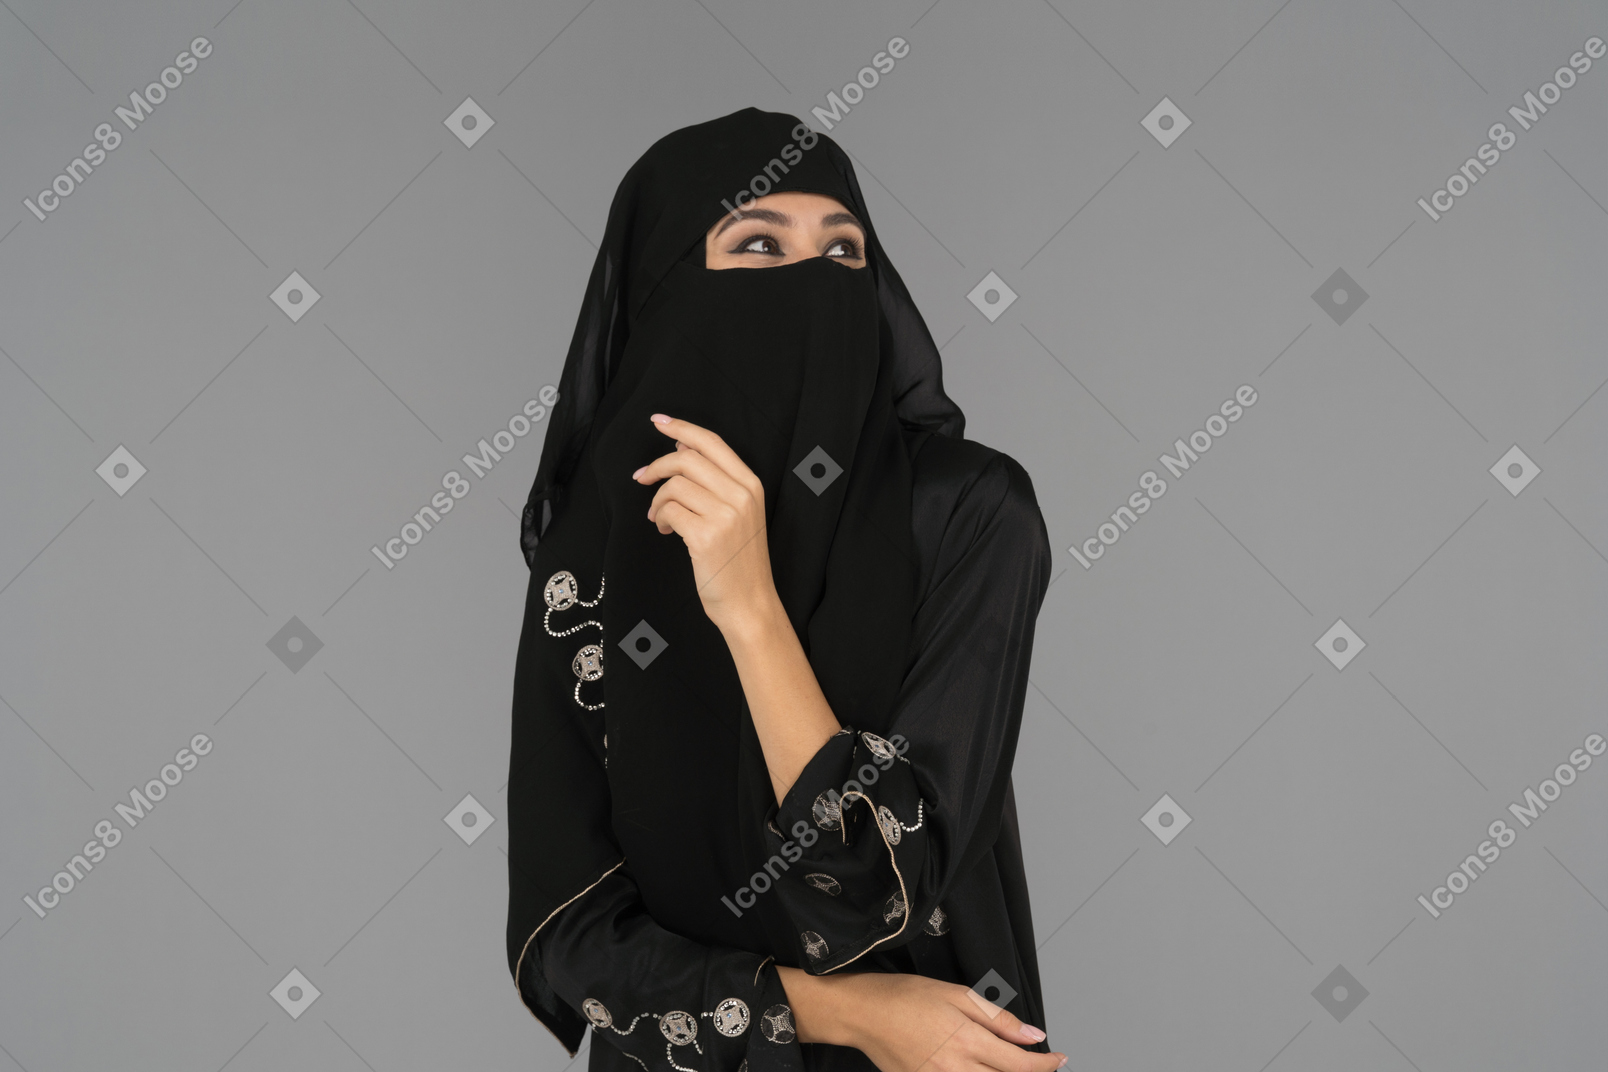 A covered muslim woman looking up